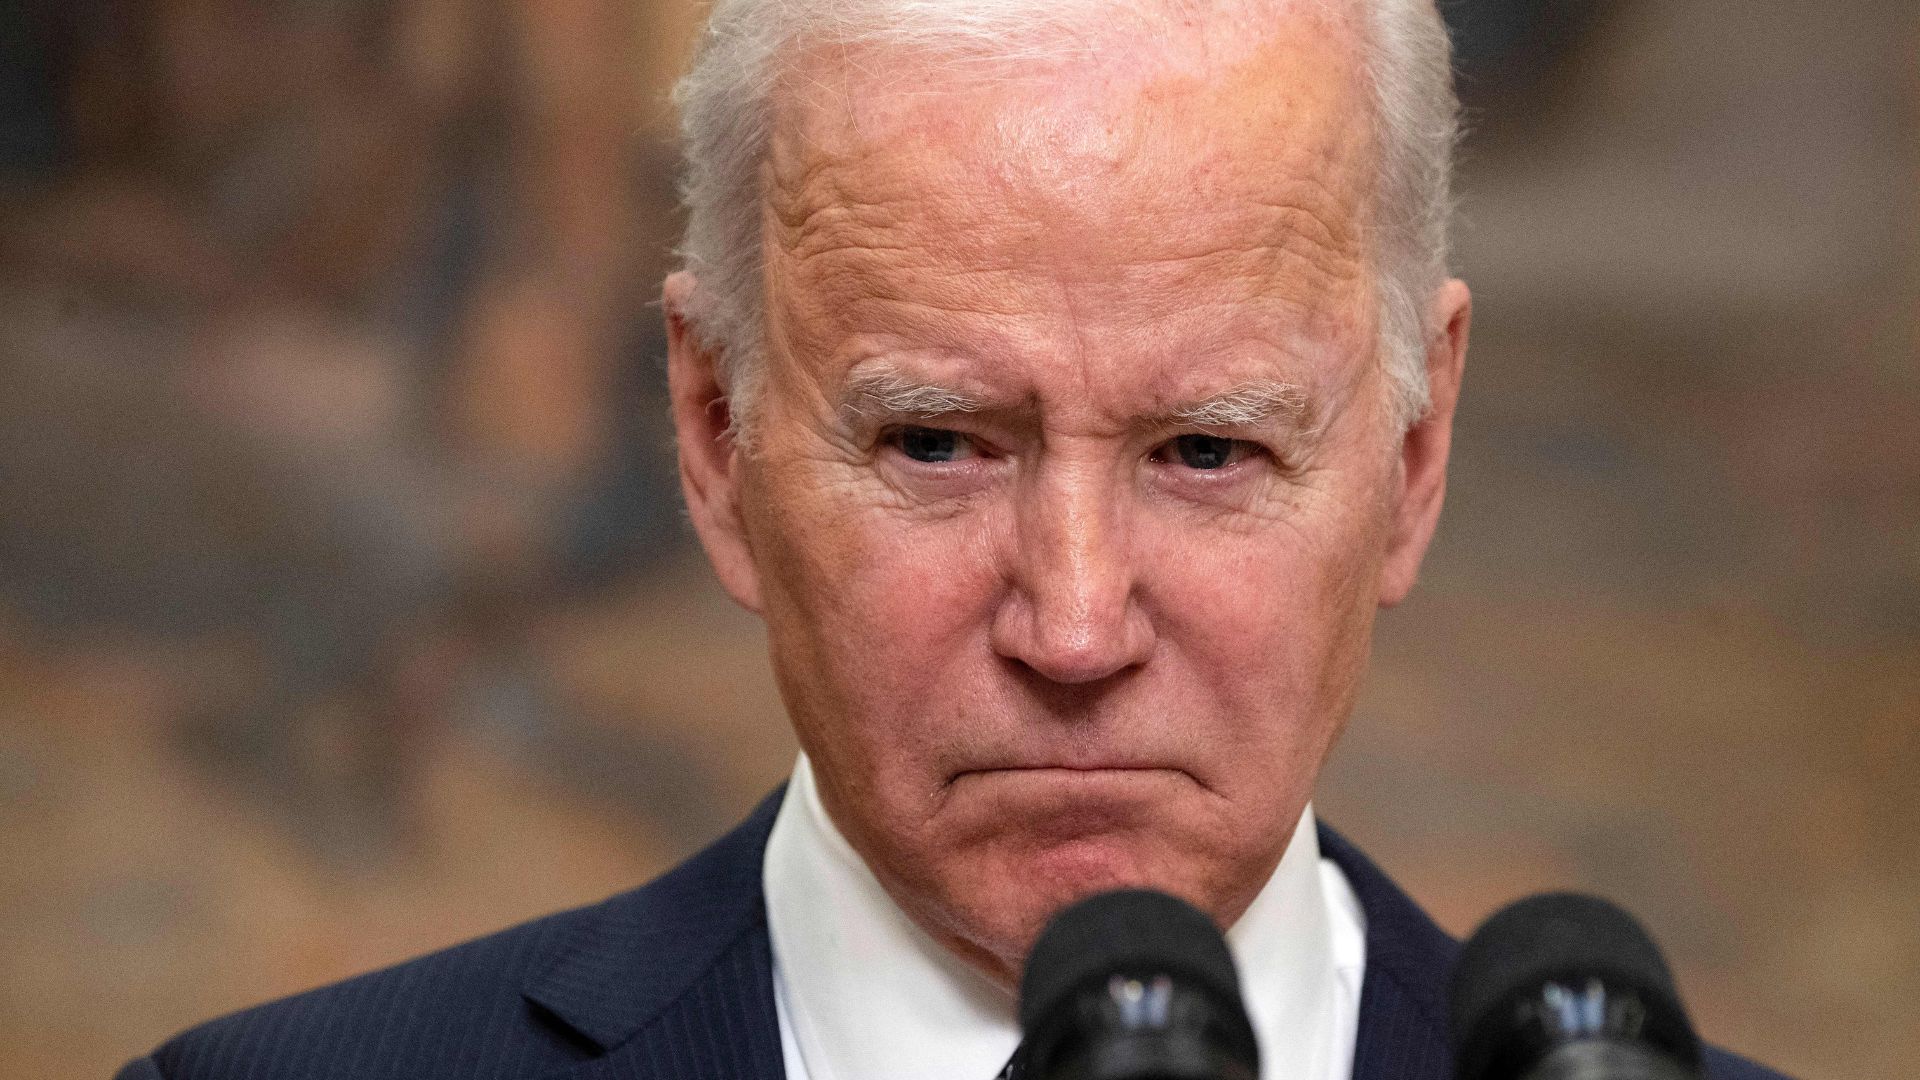 Texas Judge Deals Stinging Defeat To Biden: Trump’s ‘Remain In Mexico’ Program Must Stay